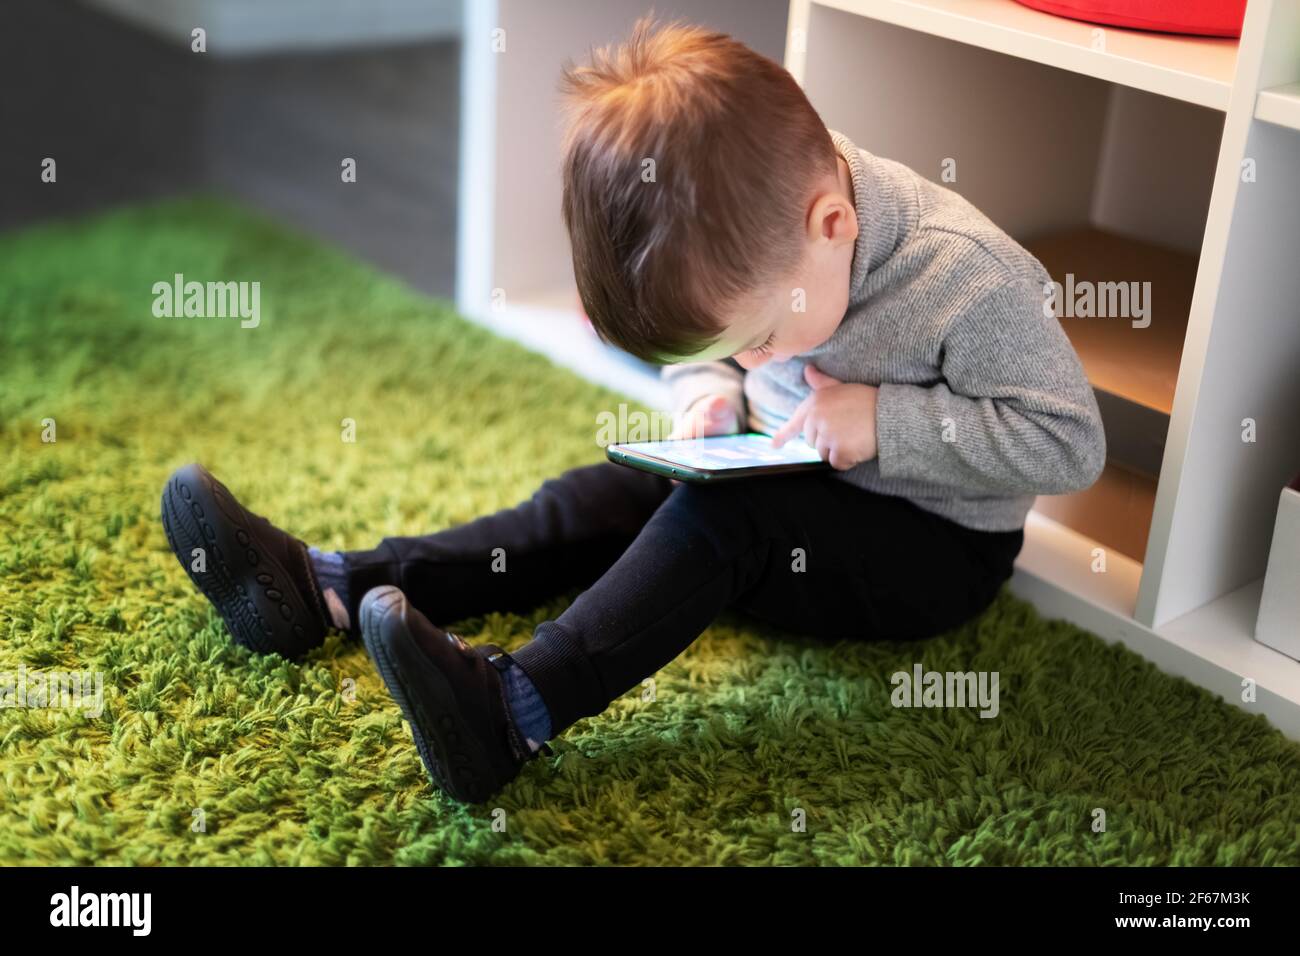 Little boy play games on smartphone Stock Photo